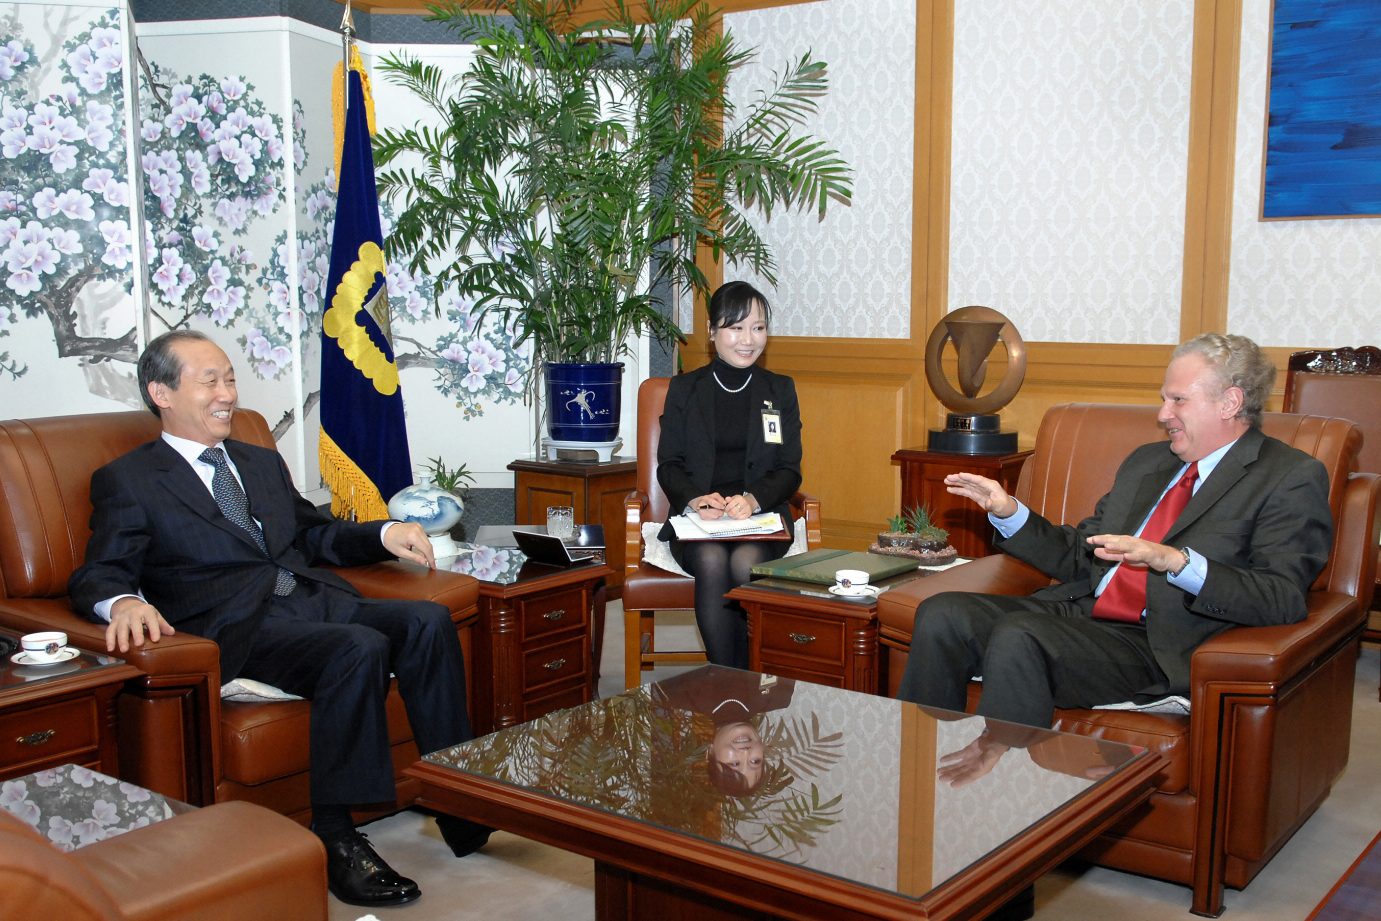 [11_25_09]New Ambassador of Austria pays a Courtesy call on the Chief Justice